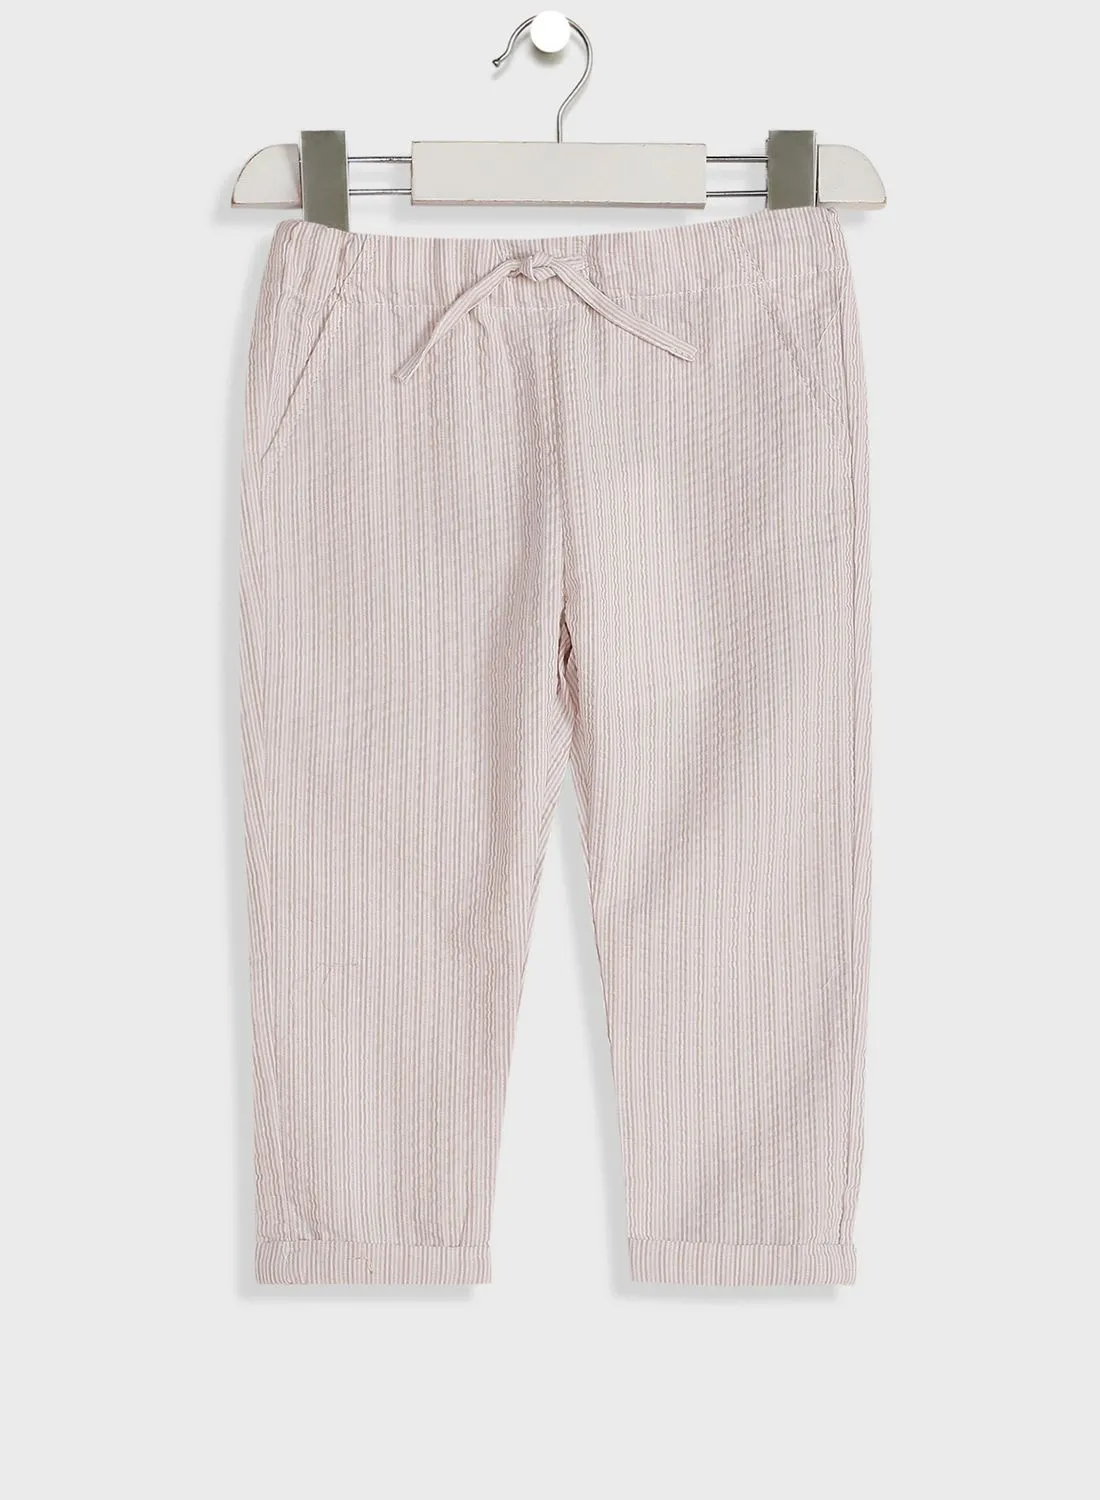 NAME IT Infant Striped Trousers